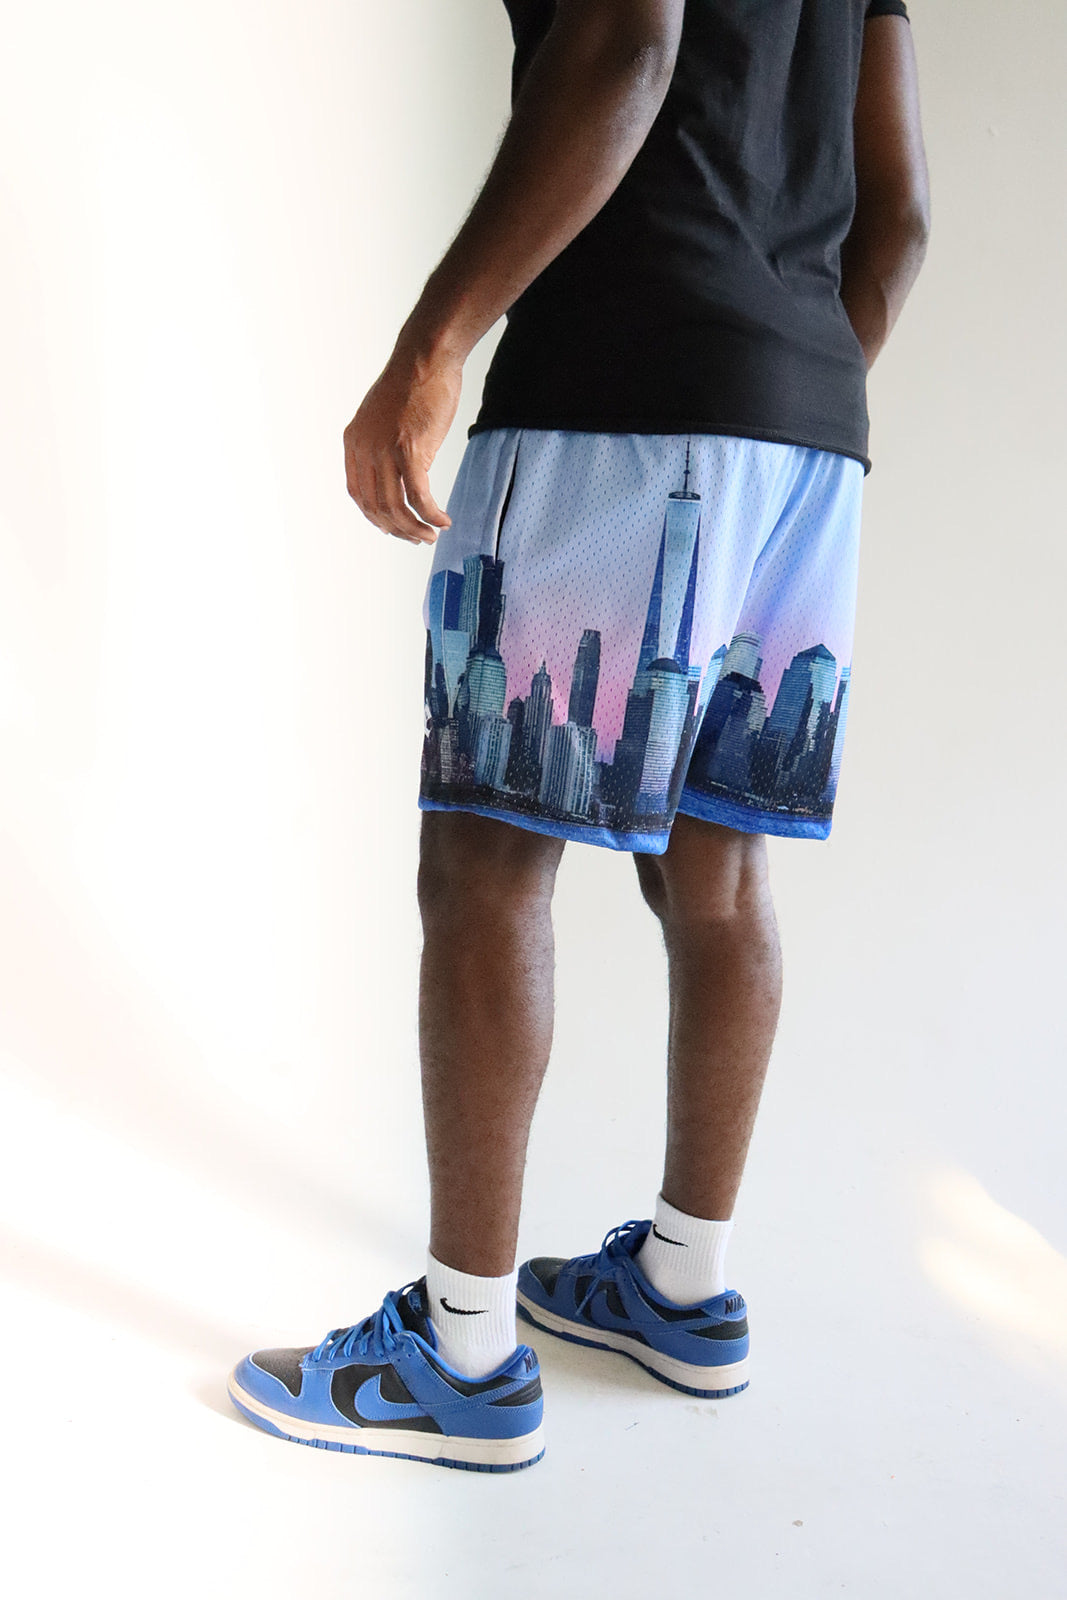 Men's graphic mesh shorts with a picture of nyc skyline